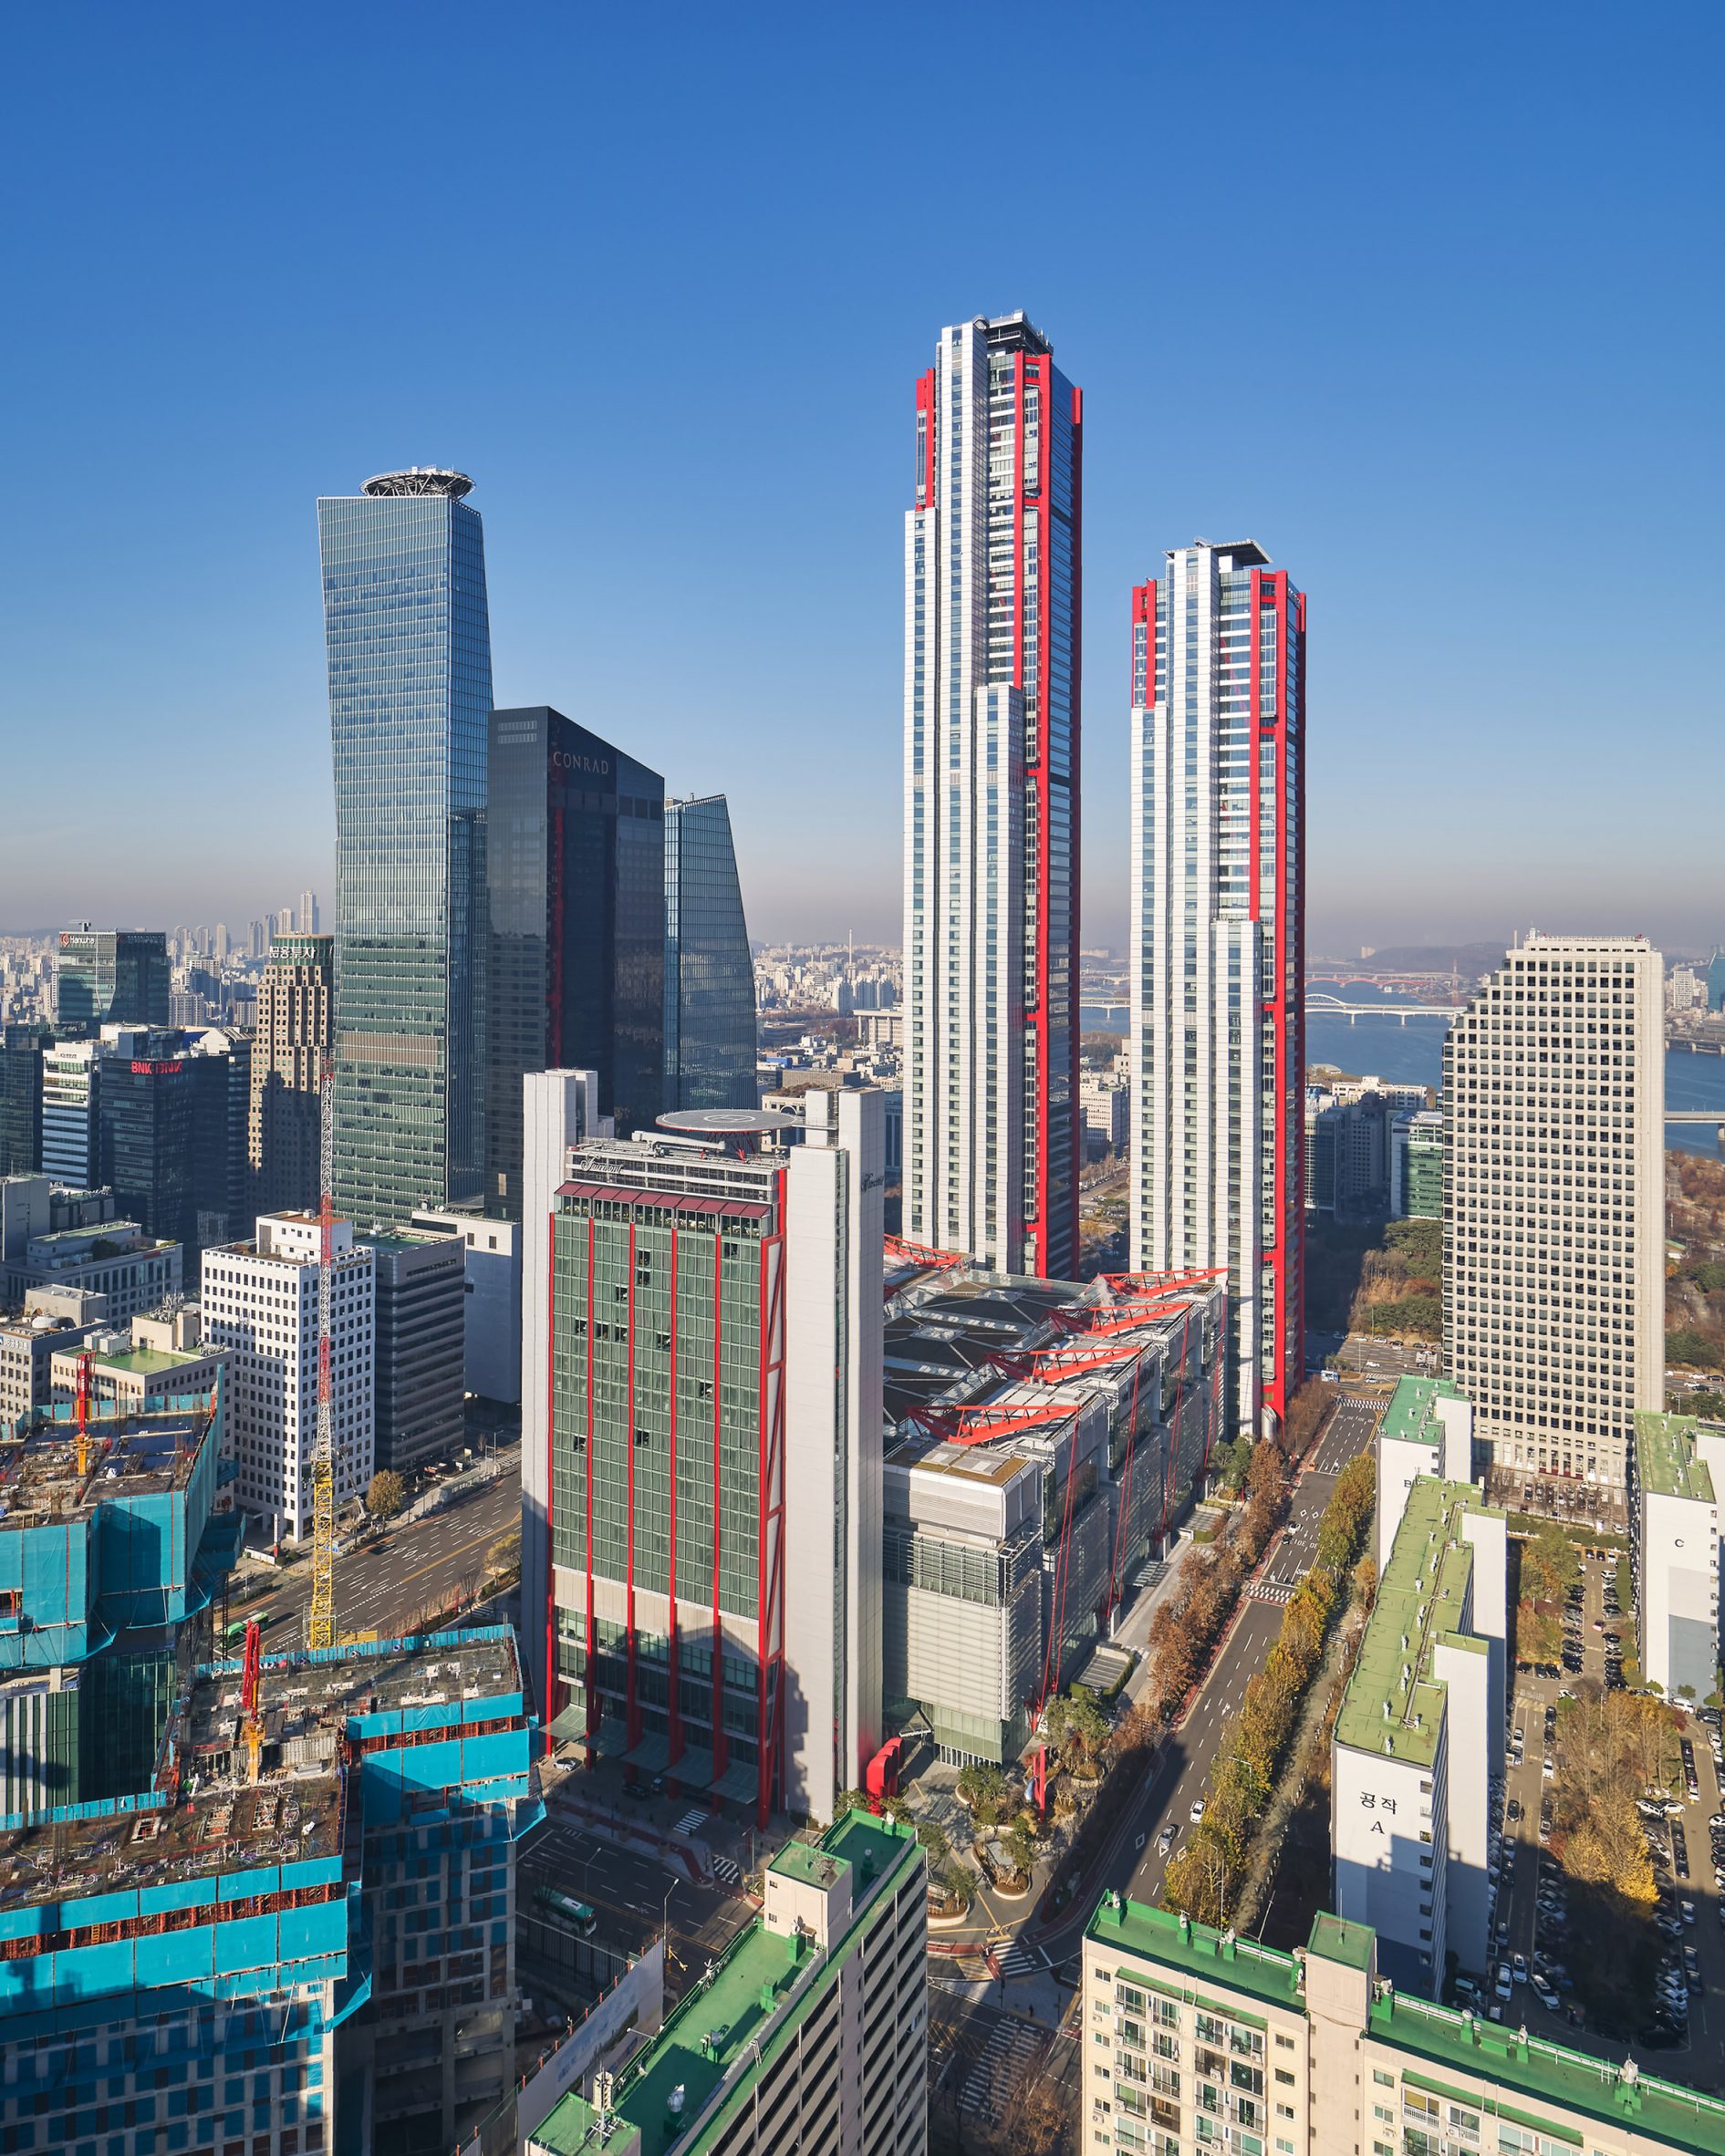 Park image.  1 above showing his two office towers